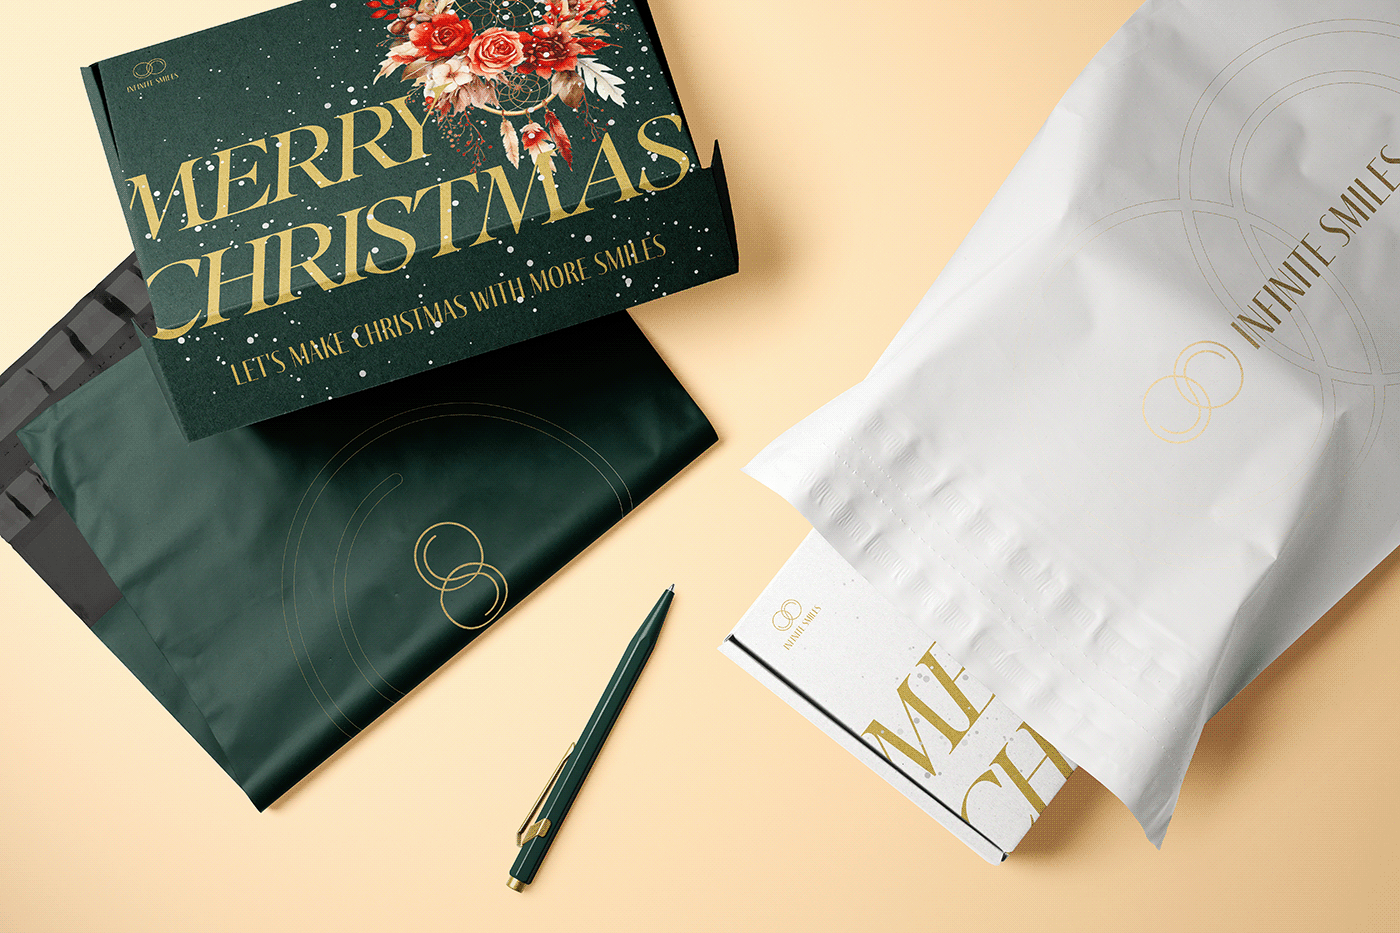 Christmas-themed packaging and bag design